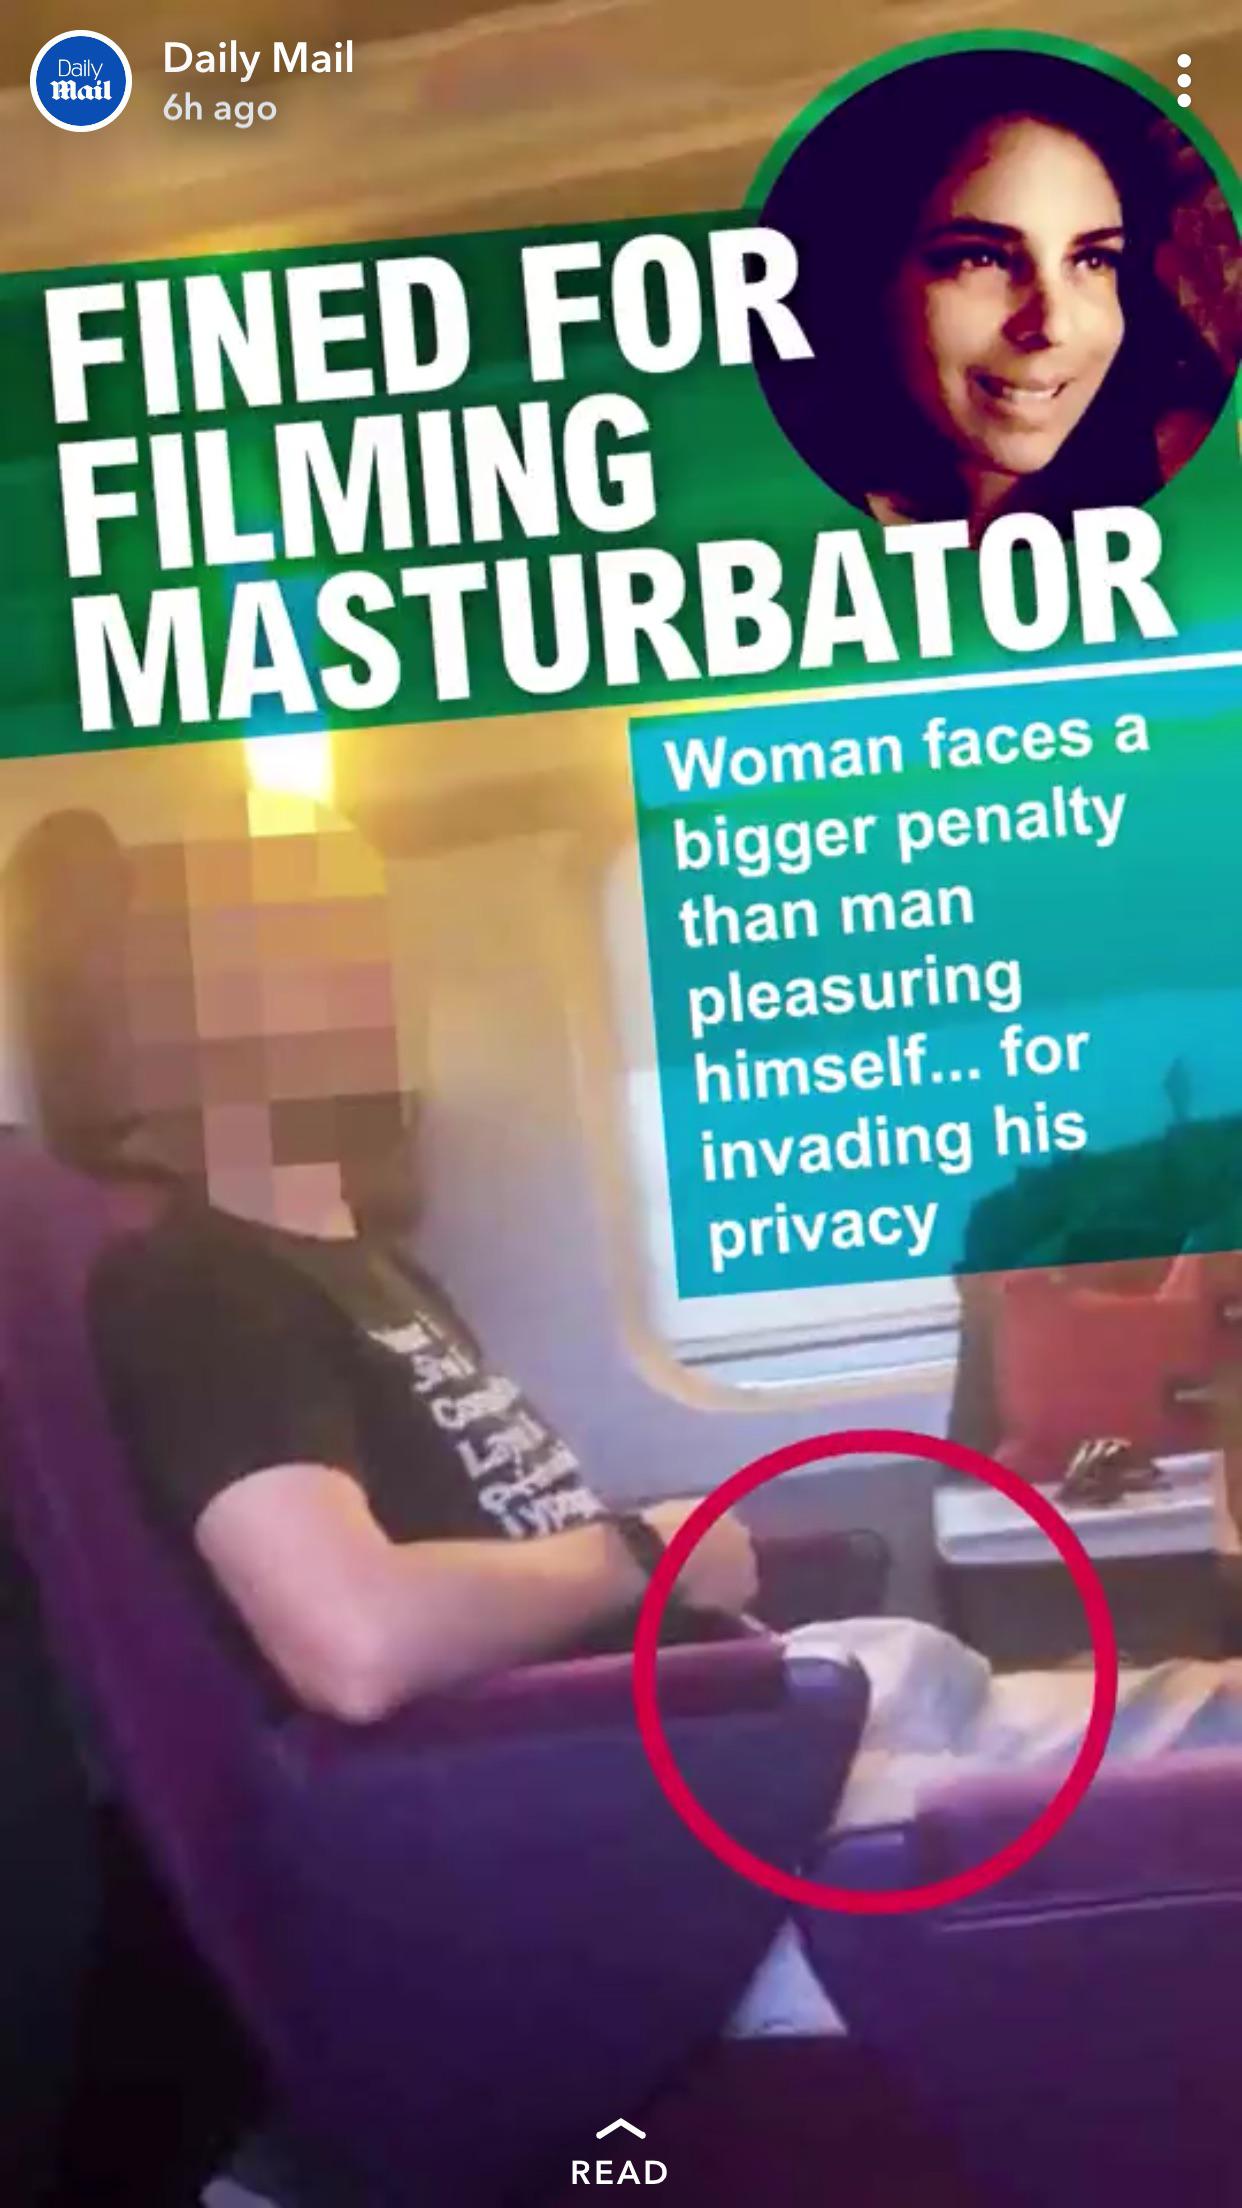 trashy people - Fined For Filming Masturbator Woman faces a bigger penalty than man pleasuring himself... for invading his privacy Read